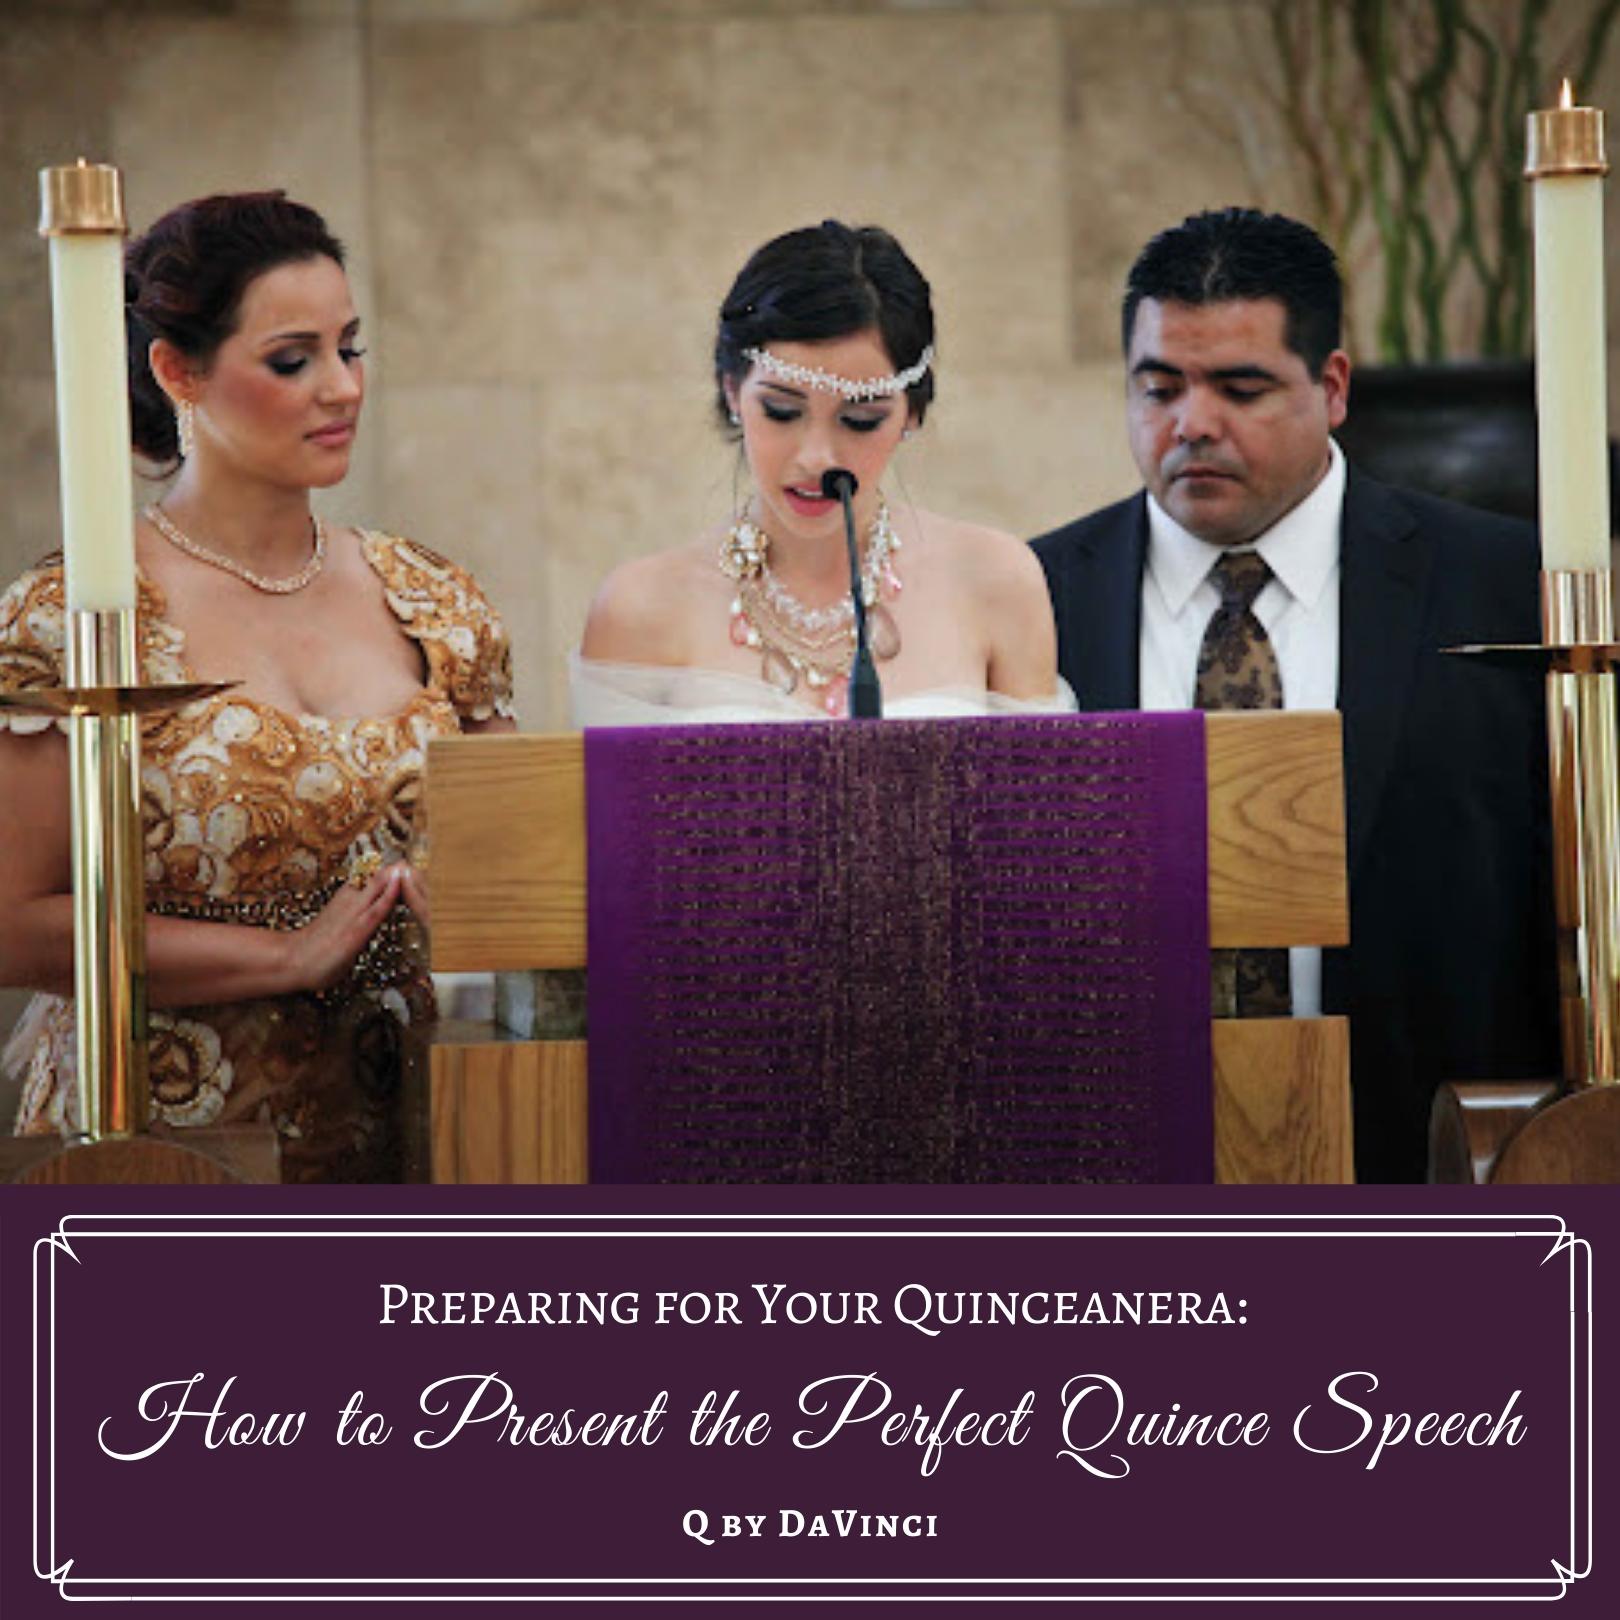 How to Present the Perfect Quince Speech